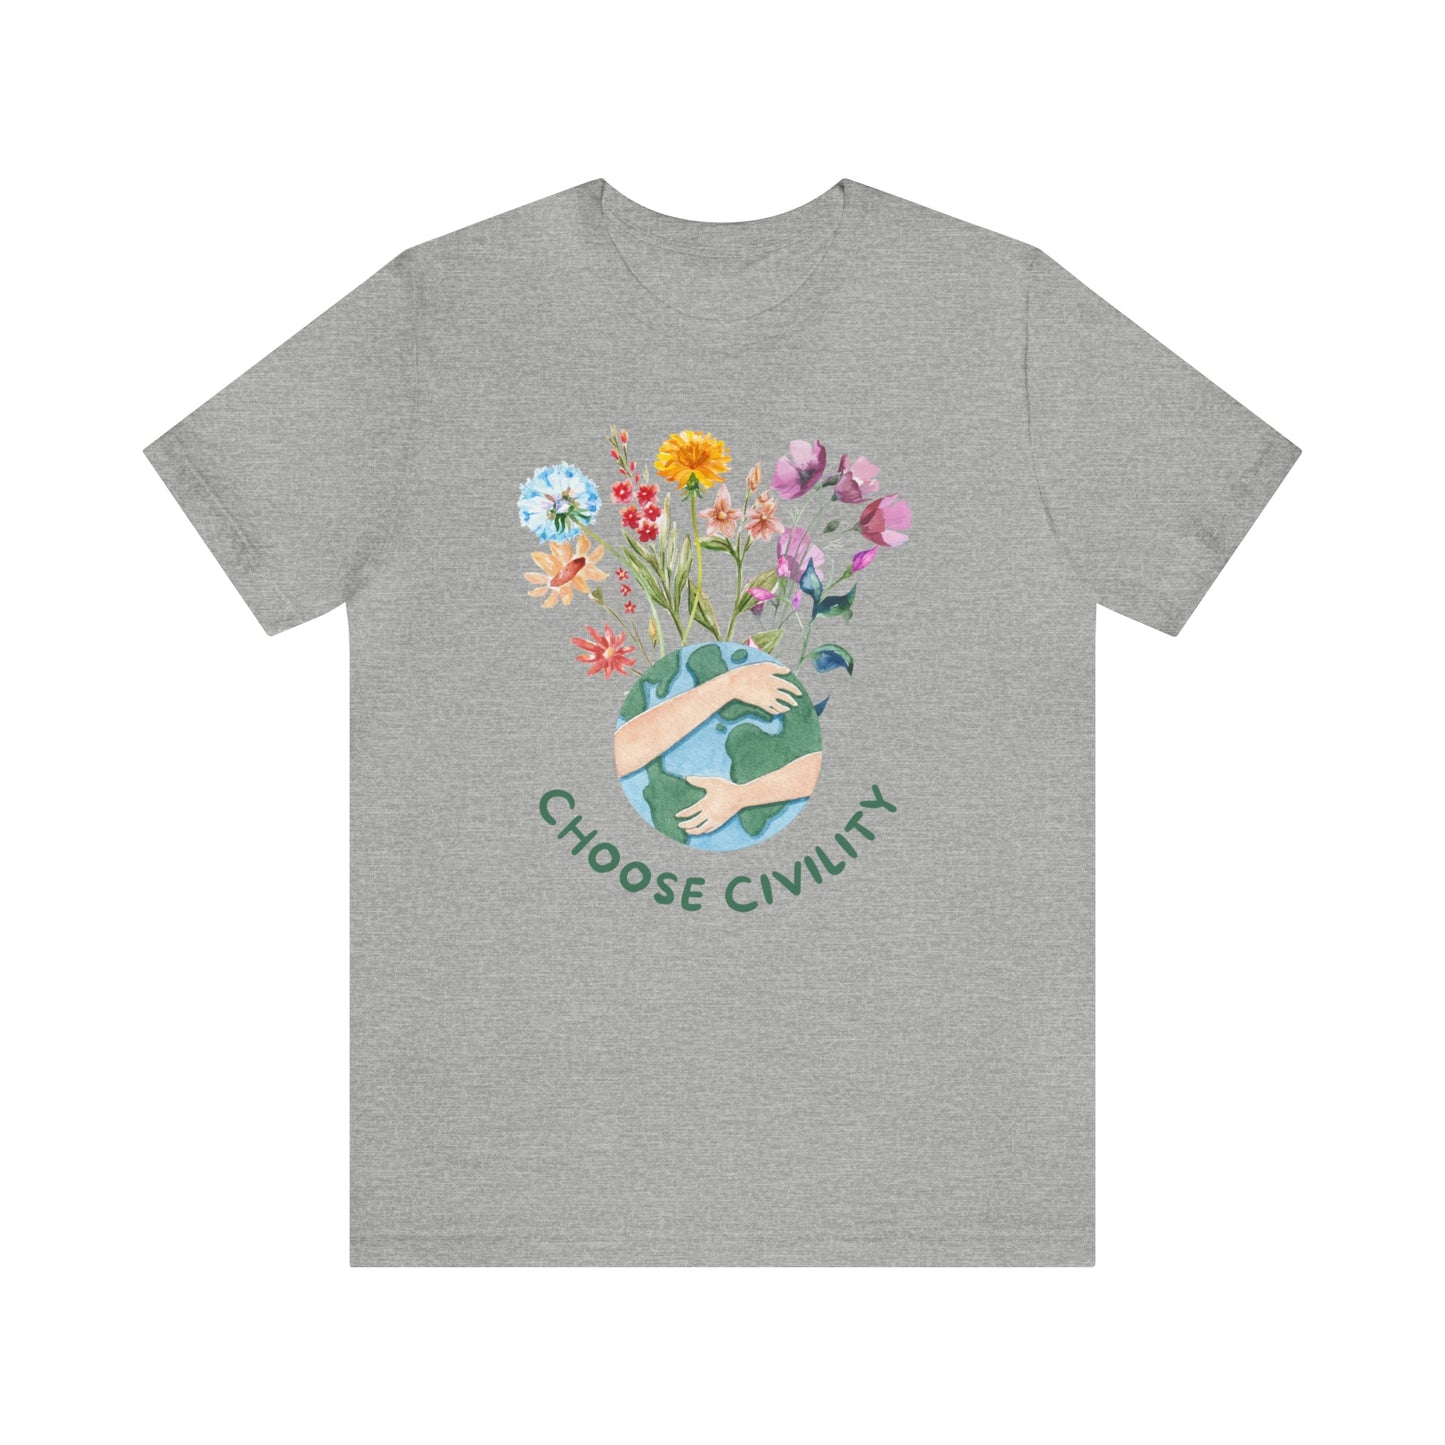 Choose Civility T-Shirt - Save the Earth